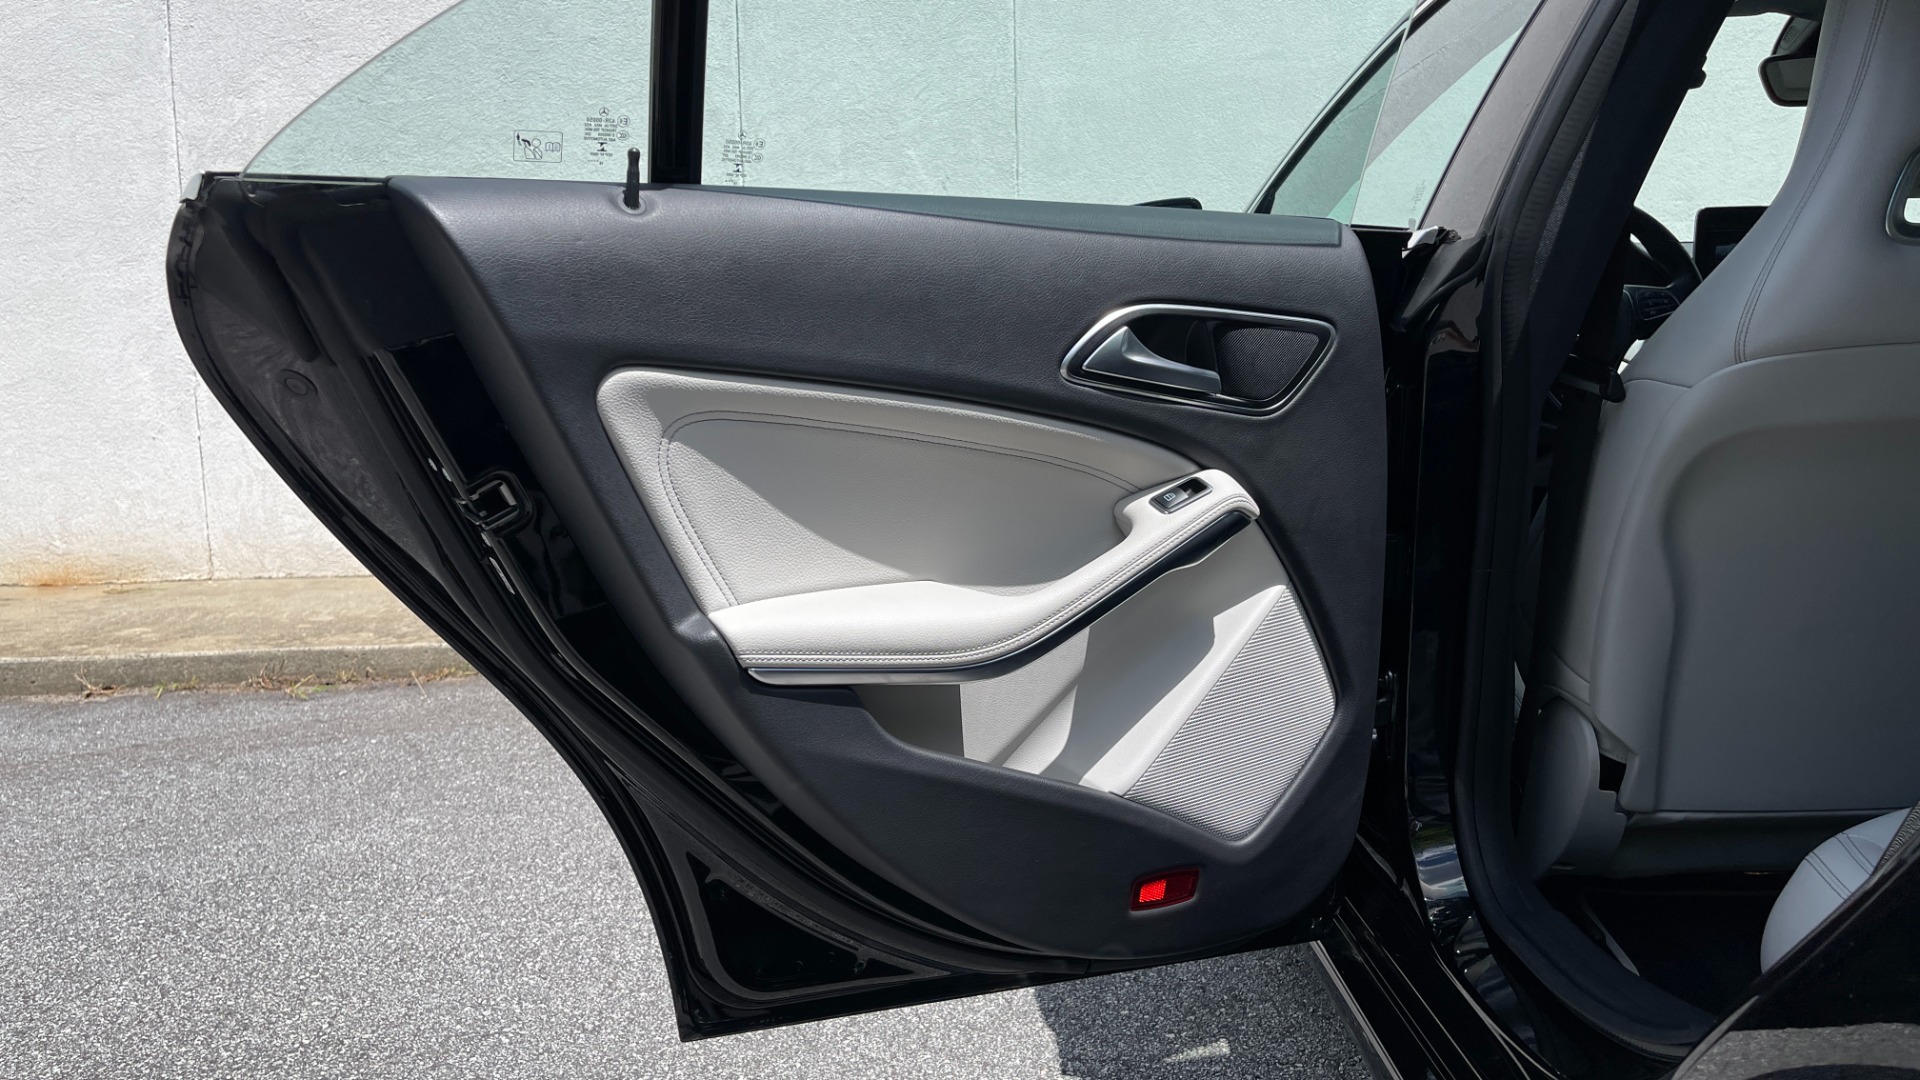 Used 2019 Mercedes-Benz CLA CLA 250 / PANORAMIC ROOF / PREMIUM / CONVENIENCE / HARMAN KARDON SOUND for sale $32,595 at Formula Imports in Charlotte NC 28227 30